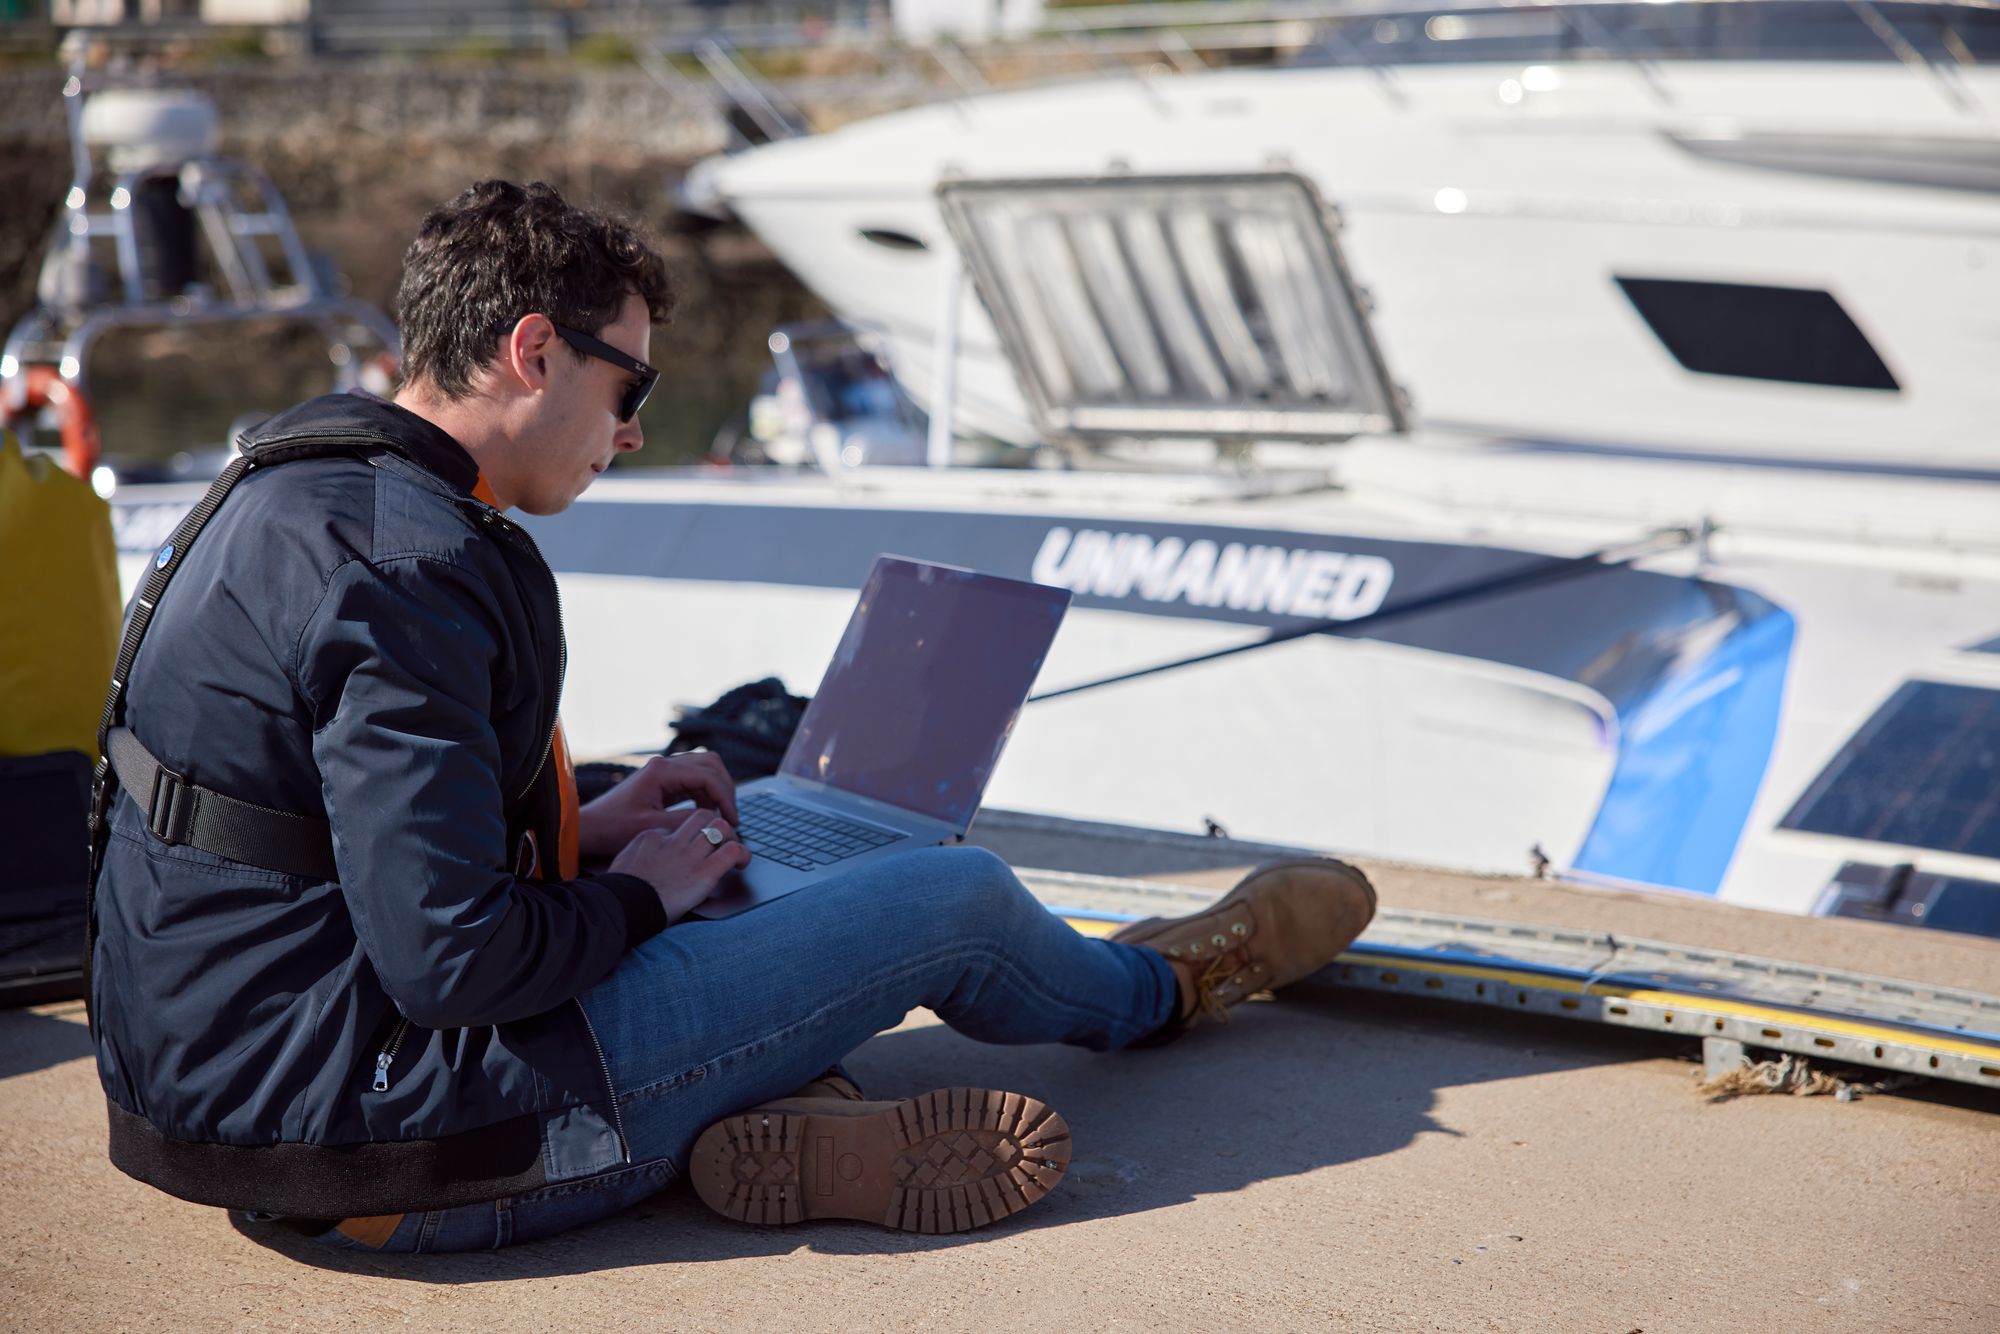 A photo of me sitting on the dock by the Mayflower Autonomous Ship with my laptop.